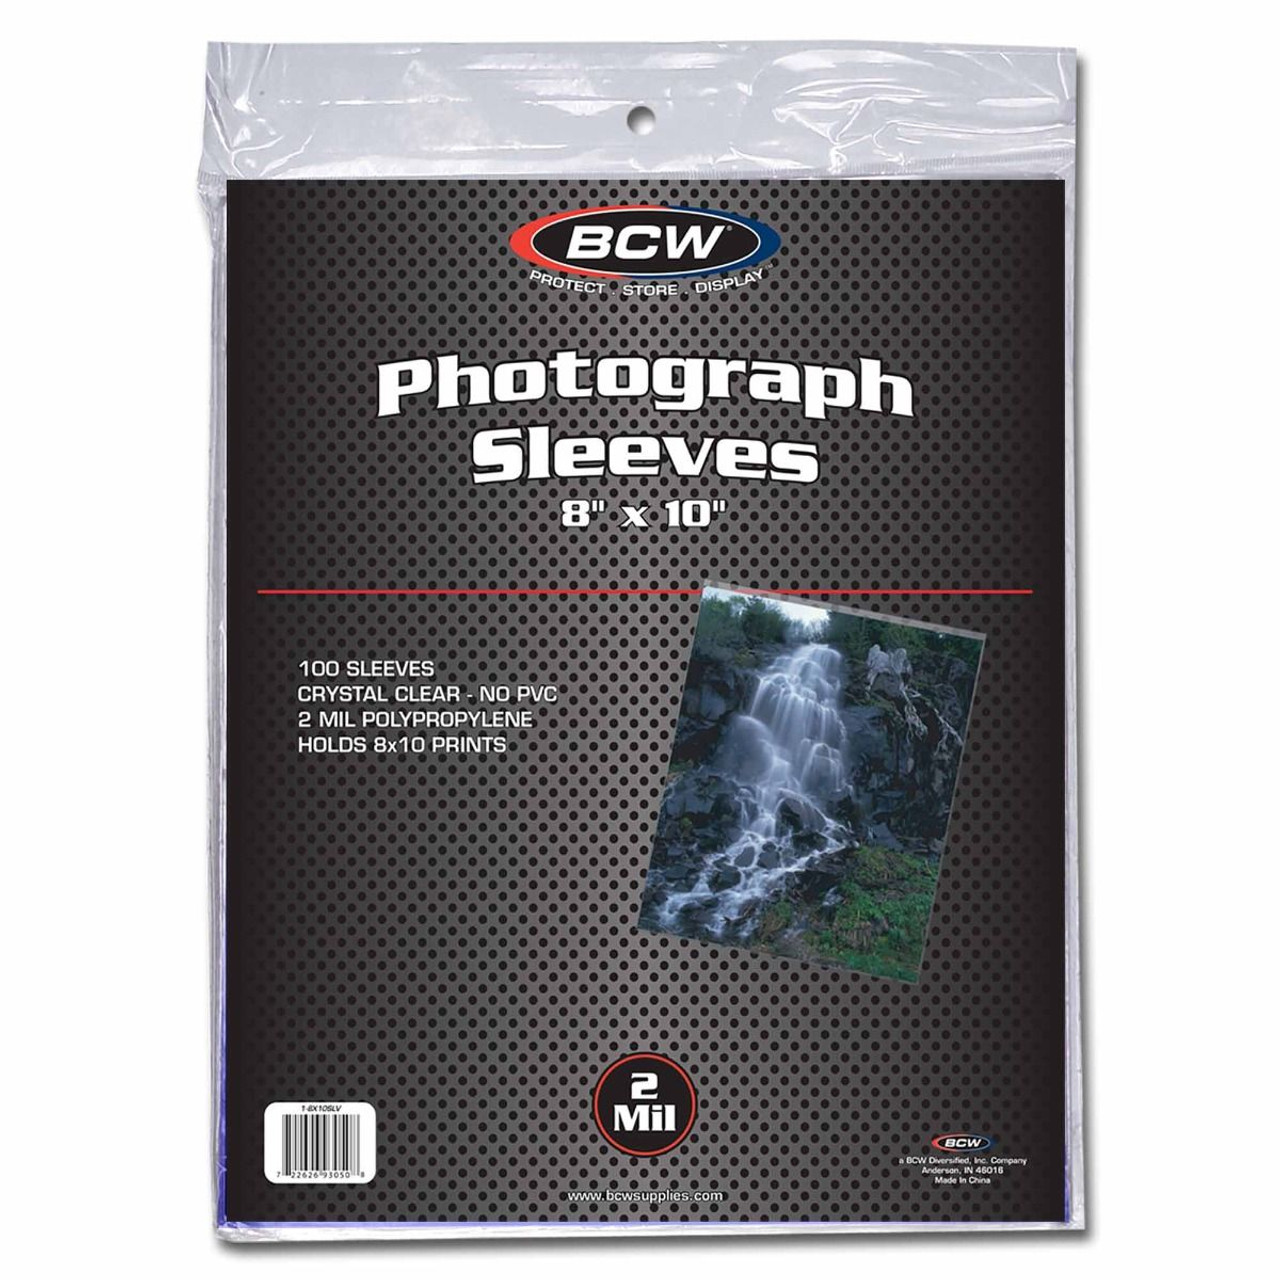 BCW 8x10 Photo Sleeves 100ct Pack / Case of 10